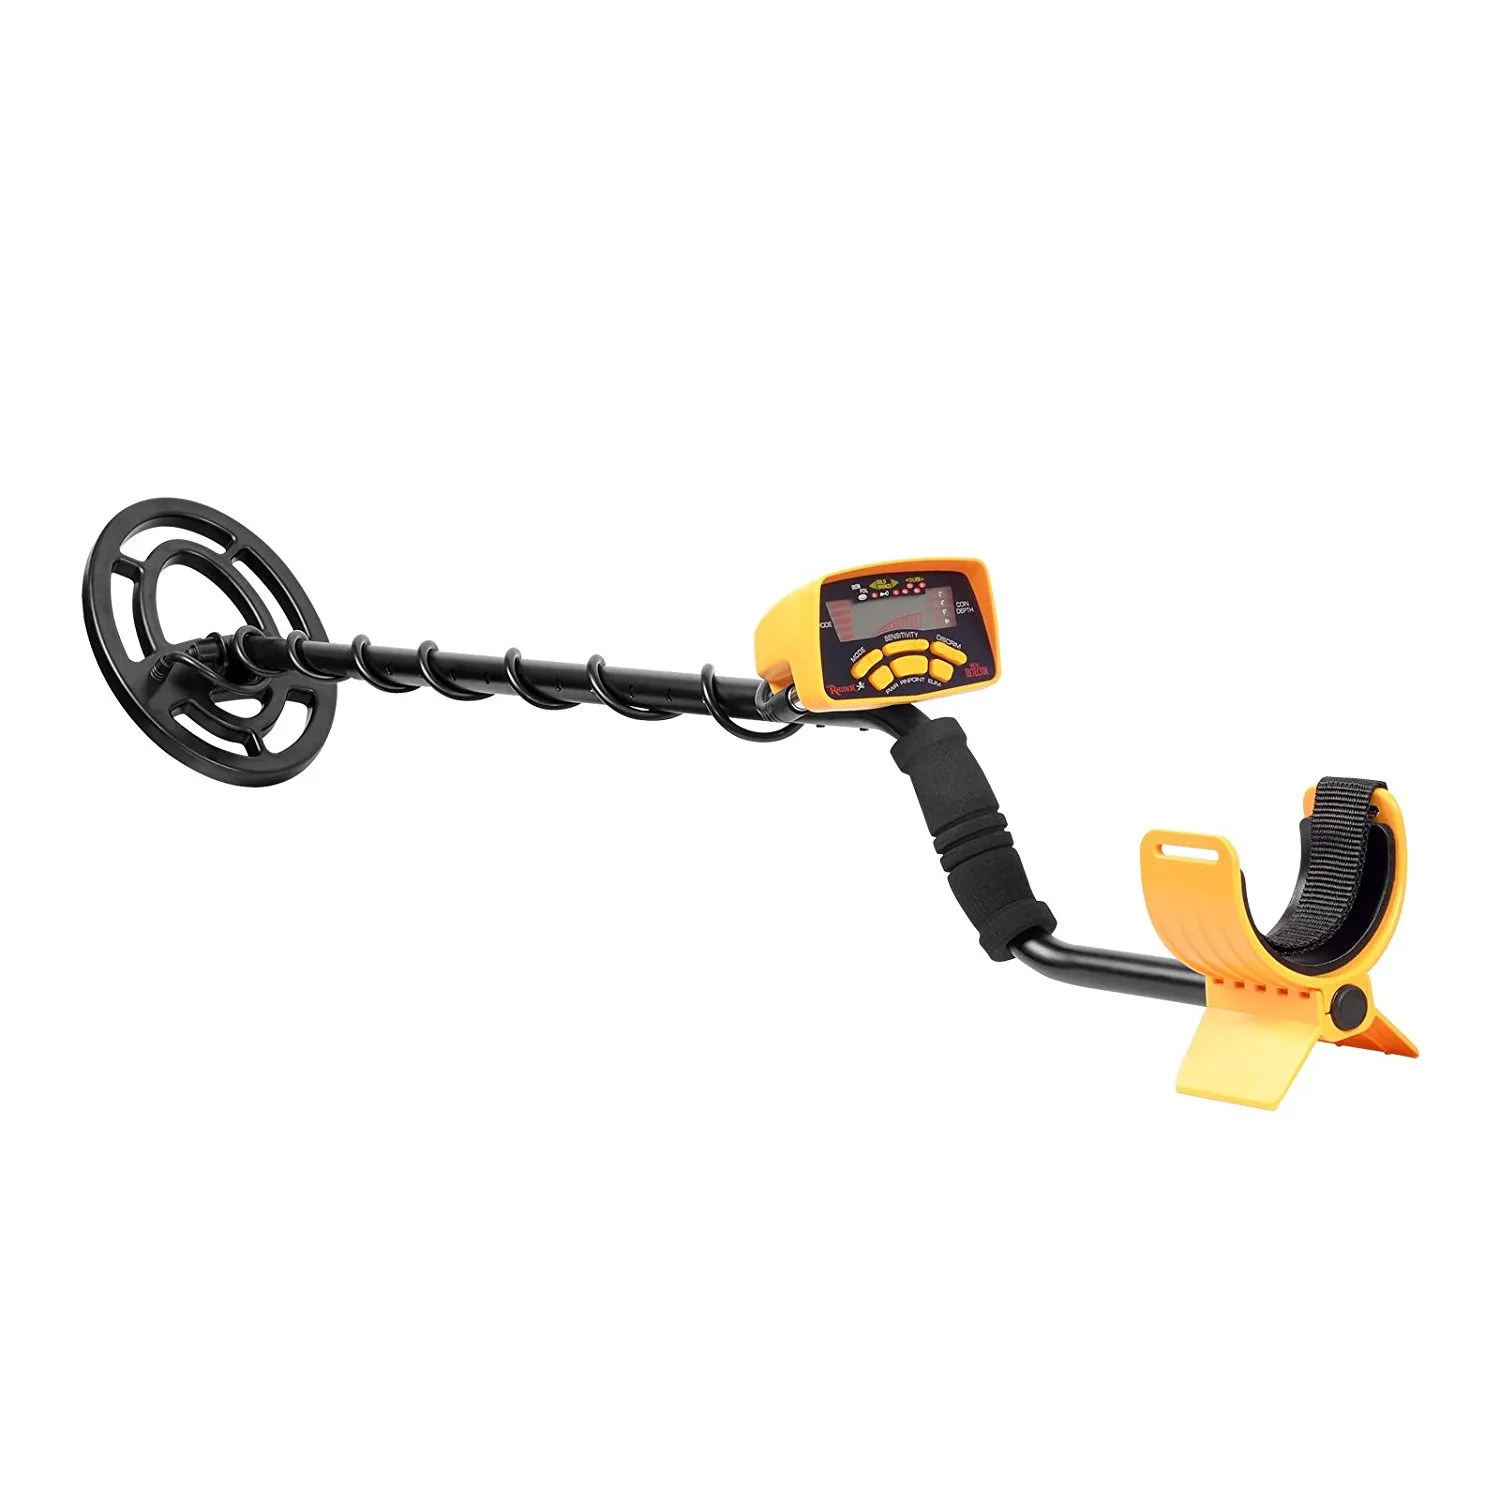 Professional MD6250 Underground Metal Detector High Performance Treasure Hunter All Metal Gold Digger Coins Pinpointer Detecting